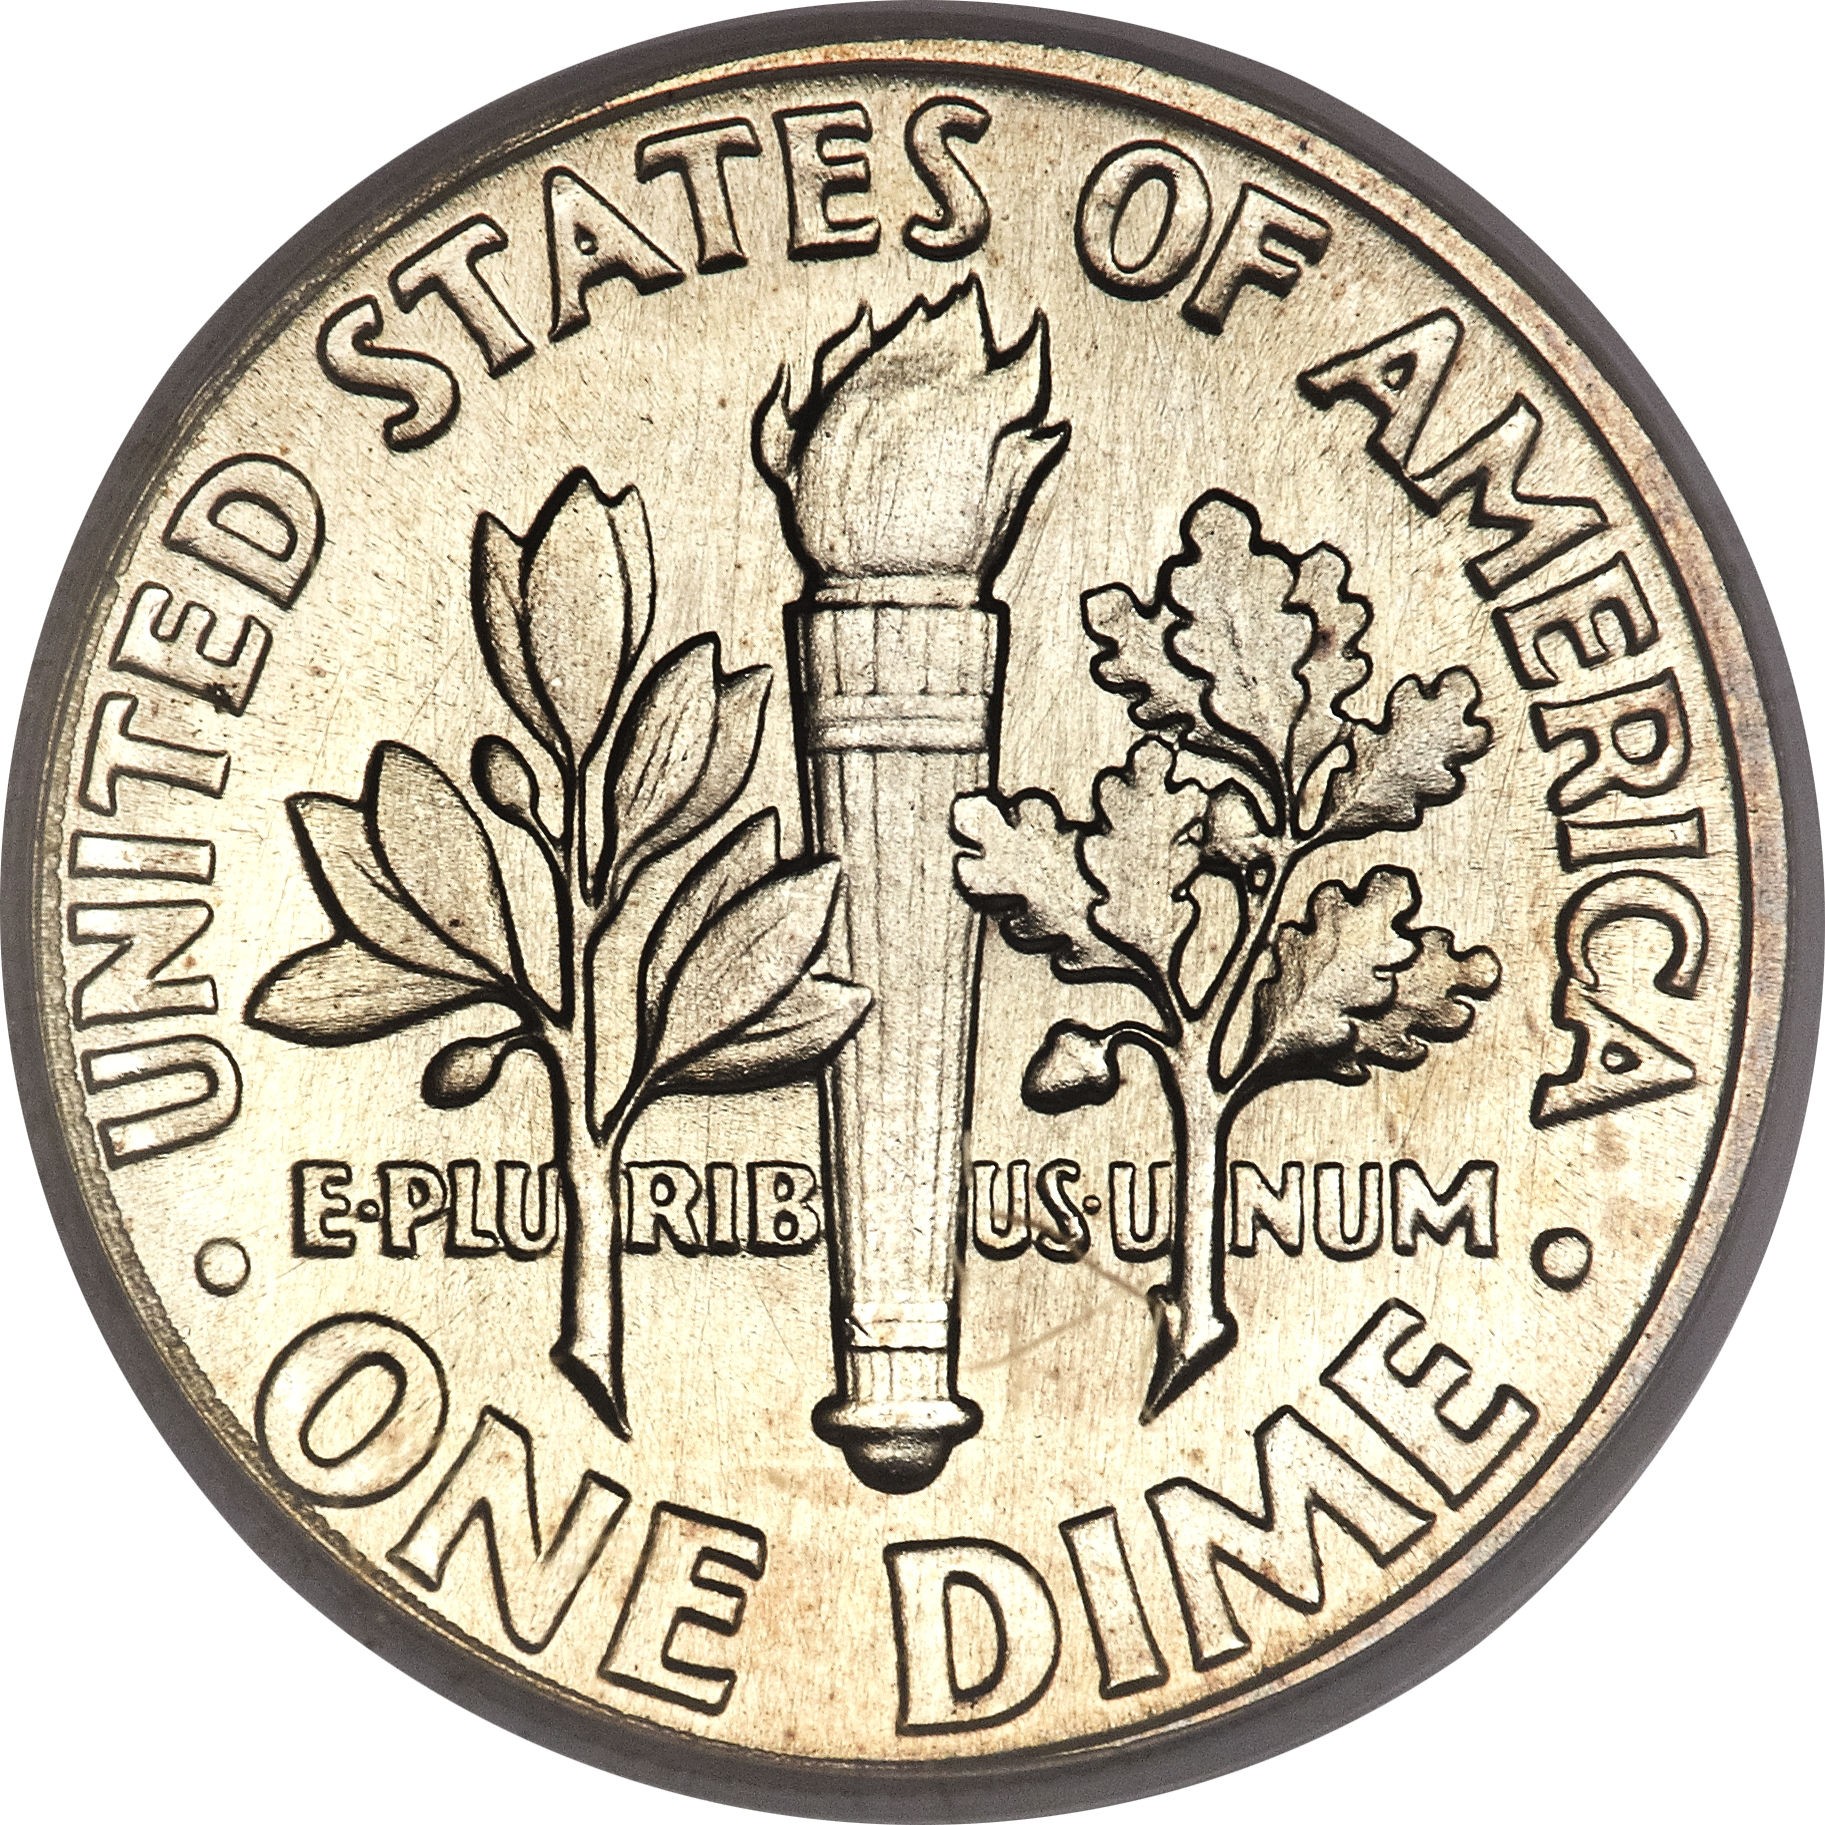 First coins. Монета one Dime Liberty. Монета 1 дайм США. One Dime монета. Монета one Dime USA.